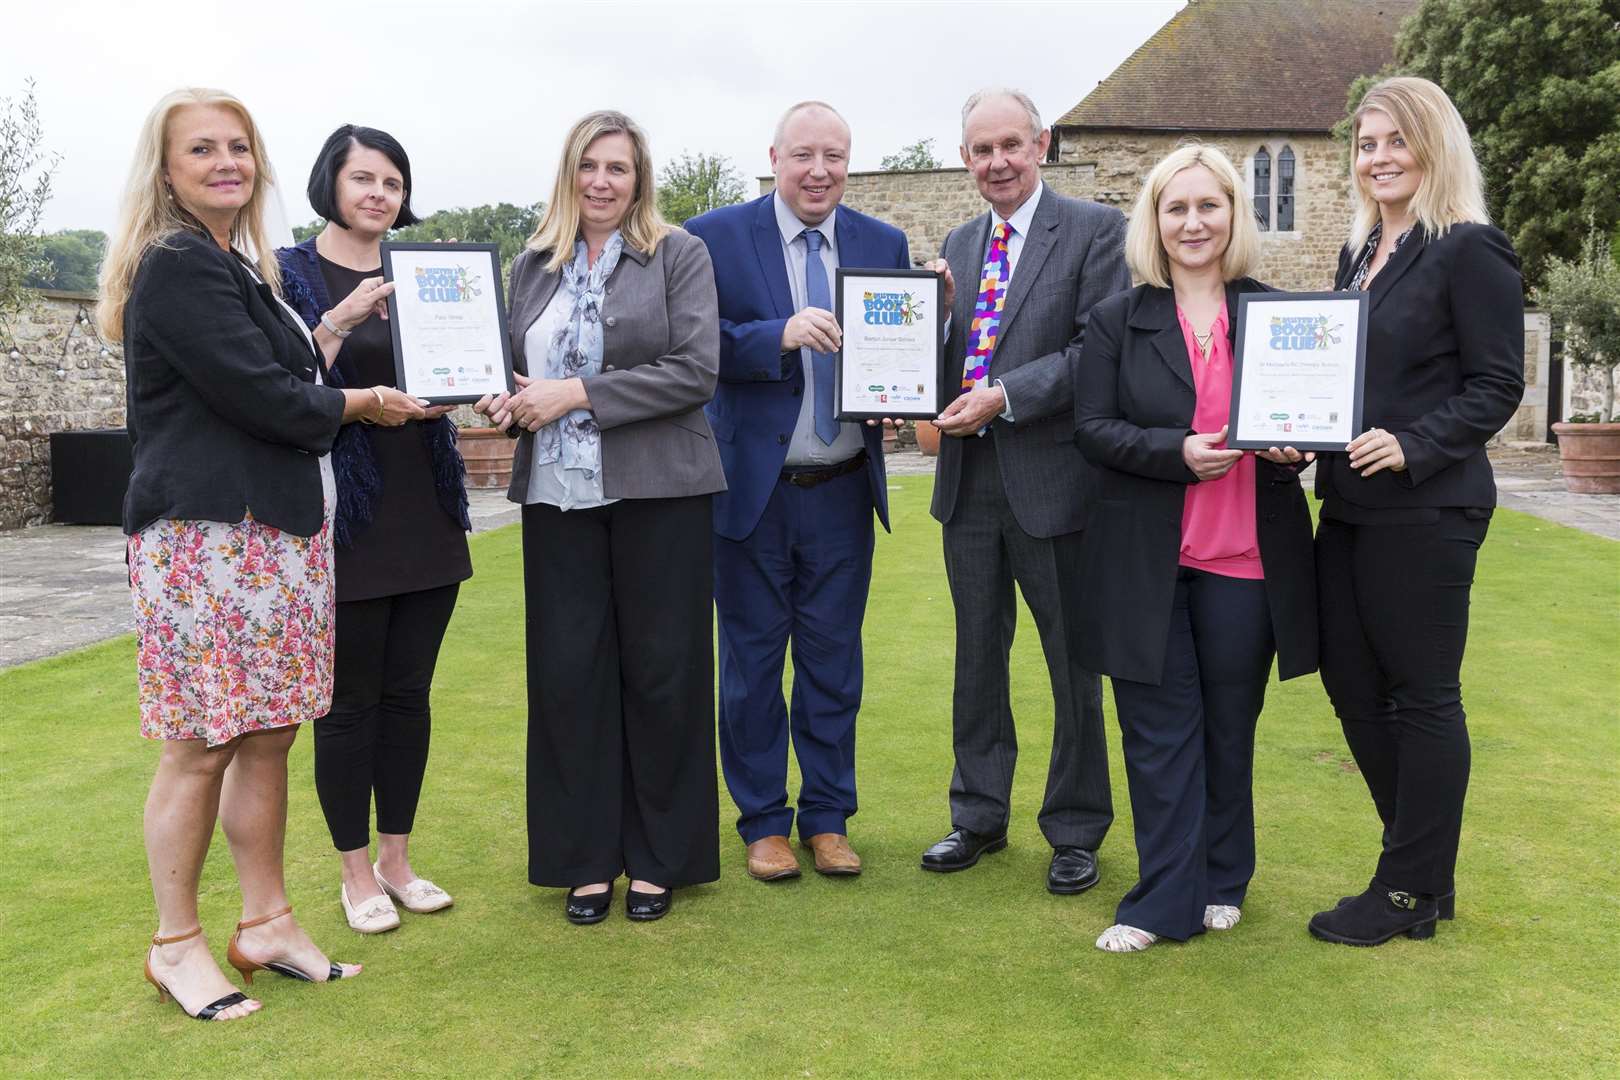 Kingfisher Primary and St Michael's RC Primary, both in Chatham, and Barton Junior School in Dover received Buster's Book Club Awards at a ceremony at Leeds Castle in Maidstone organised by the KM Charity Team.